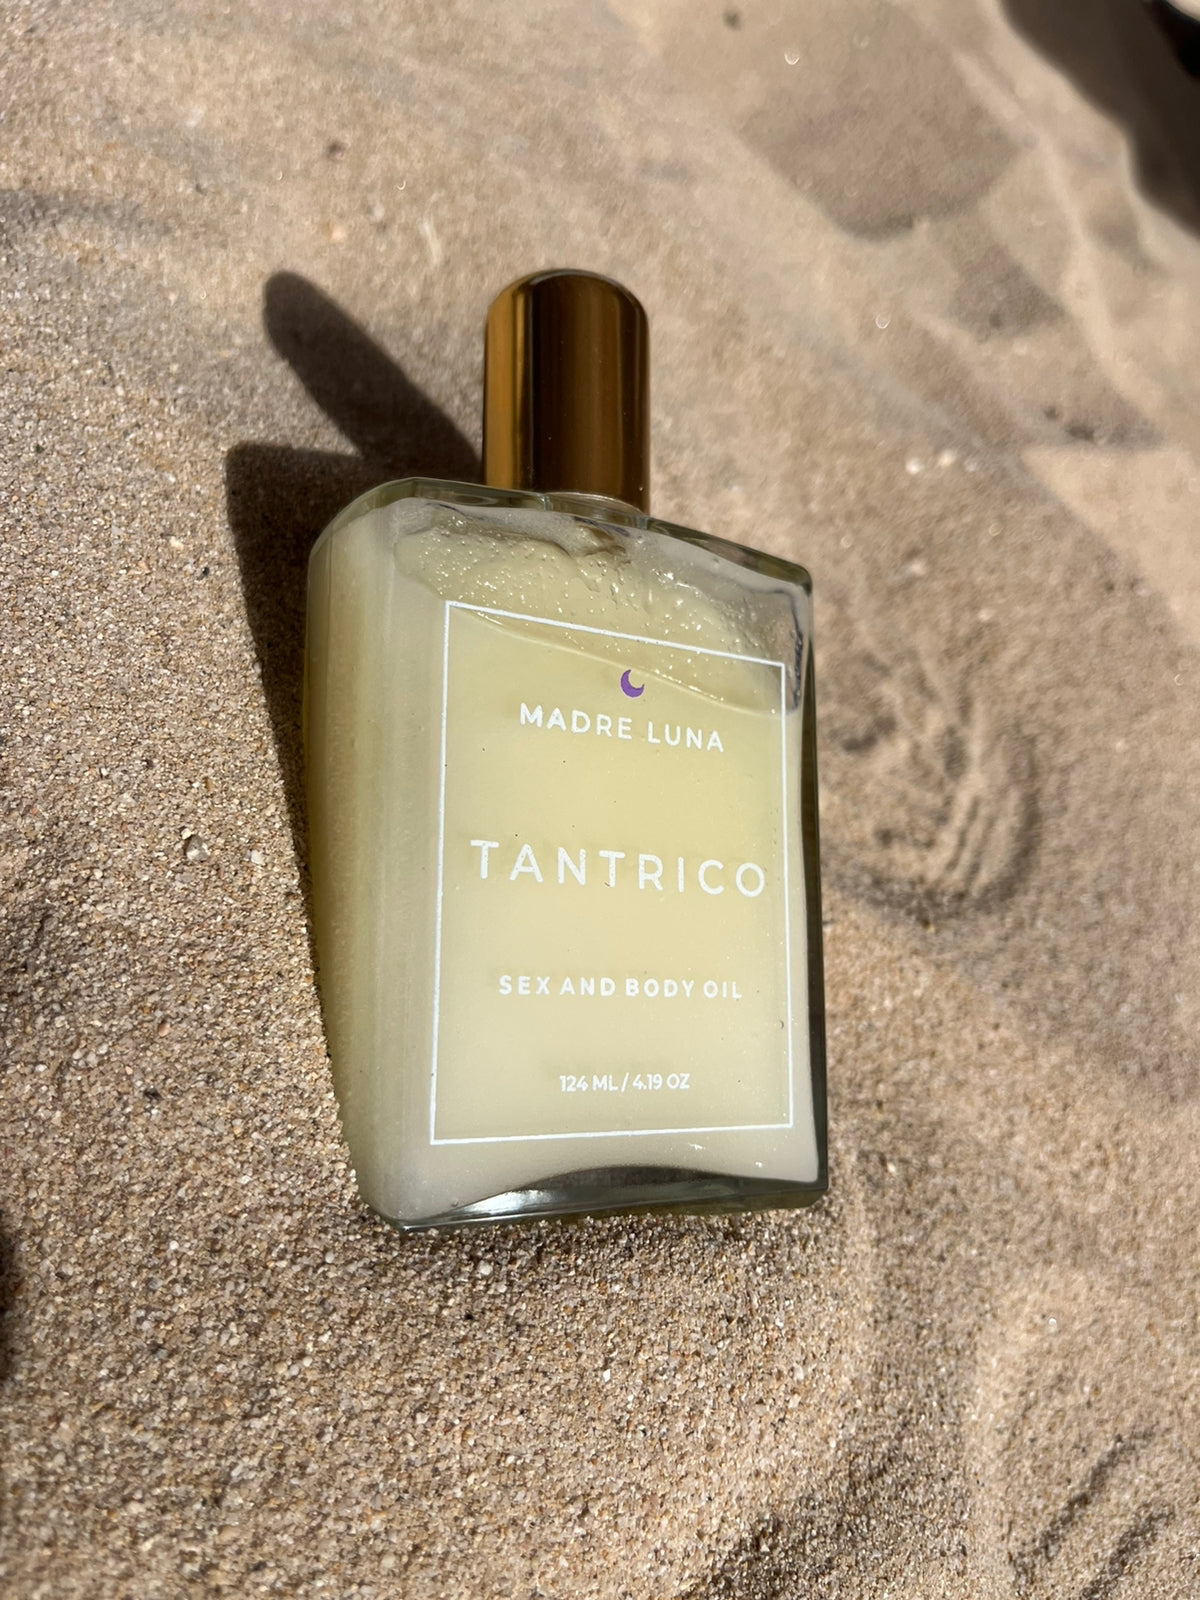 TANTRICO - SEX AND BODY OIL